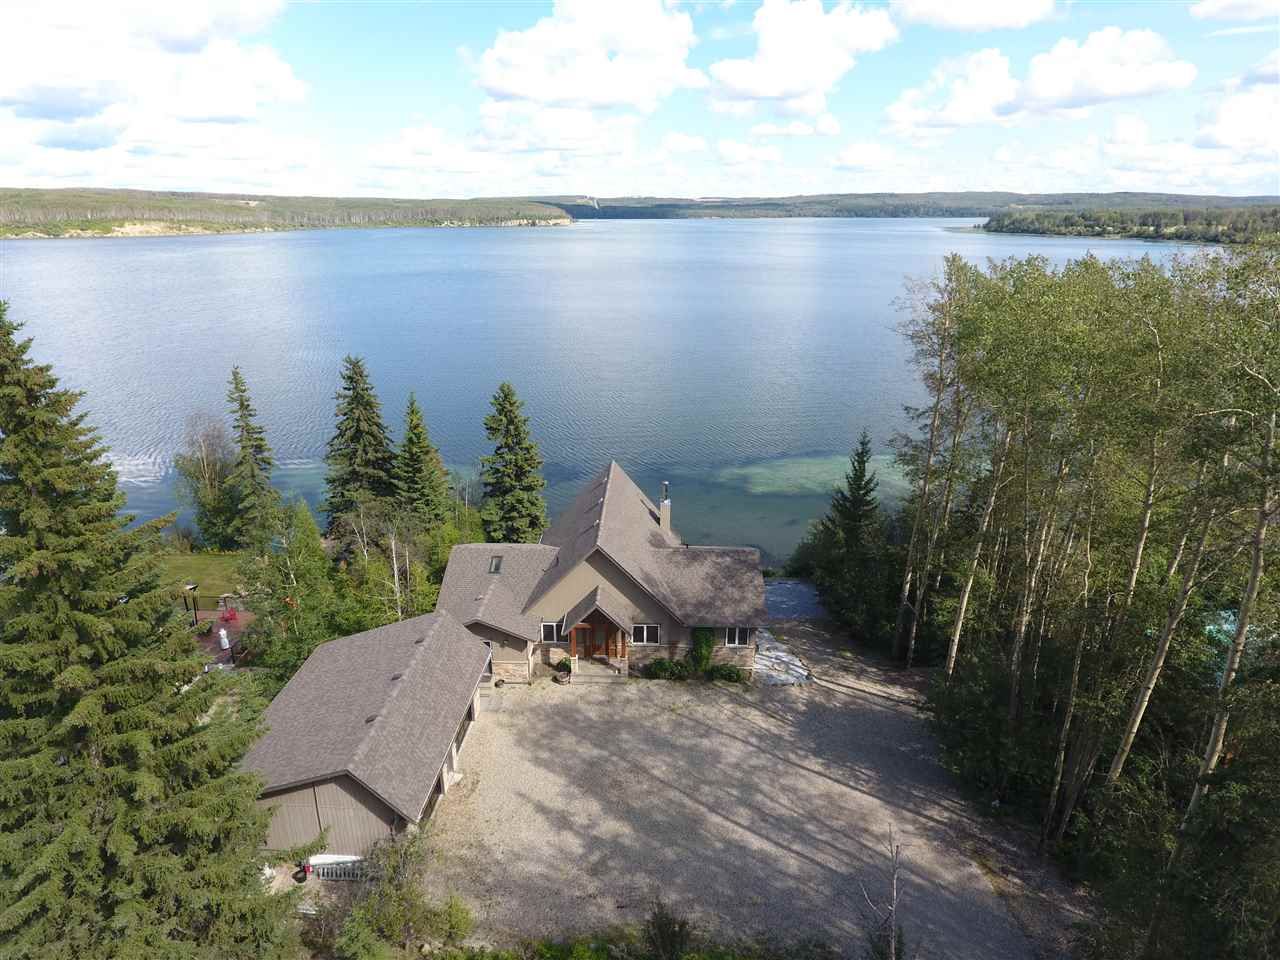 Main Photo: 13793 GOLF COURSE Road: Charlie Lake House for sale (Fort St. John (Zone 60))  : MLS®# R2488675